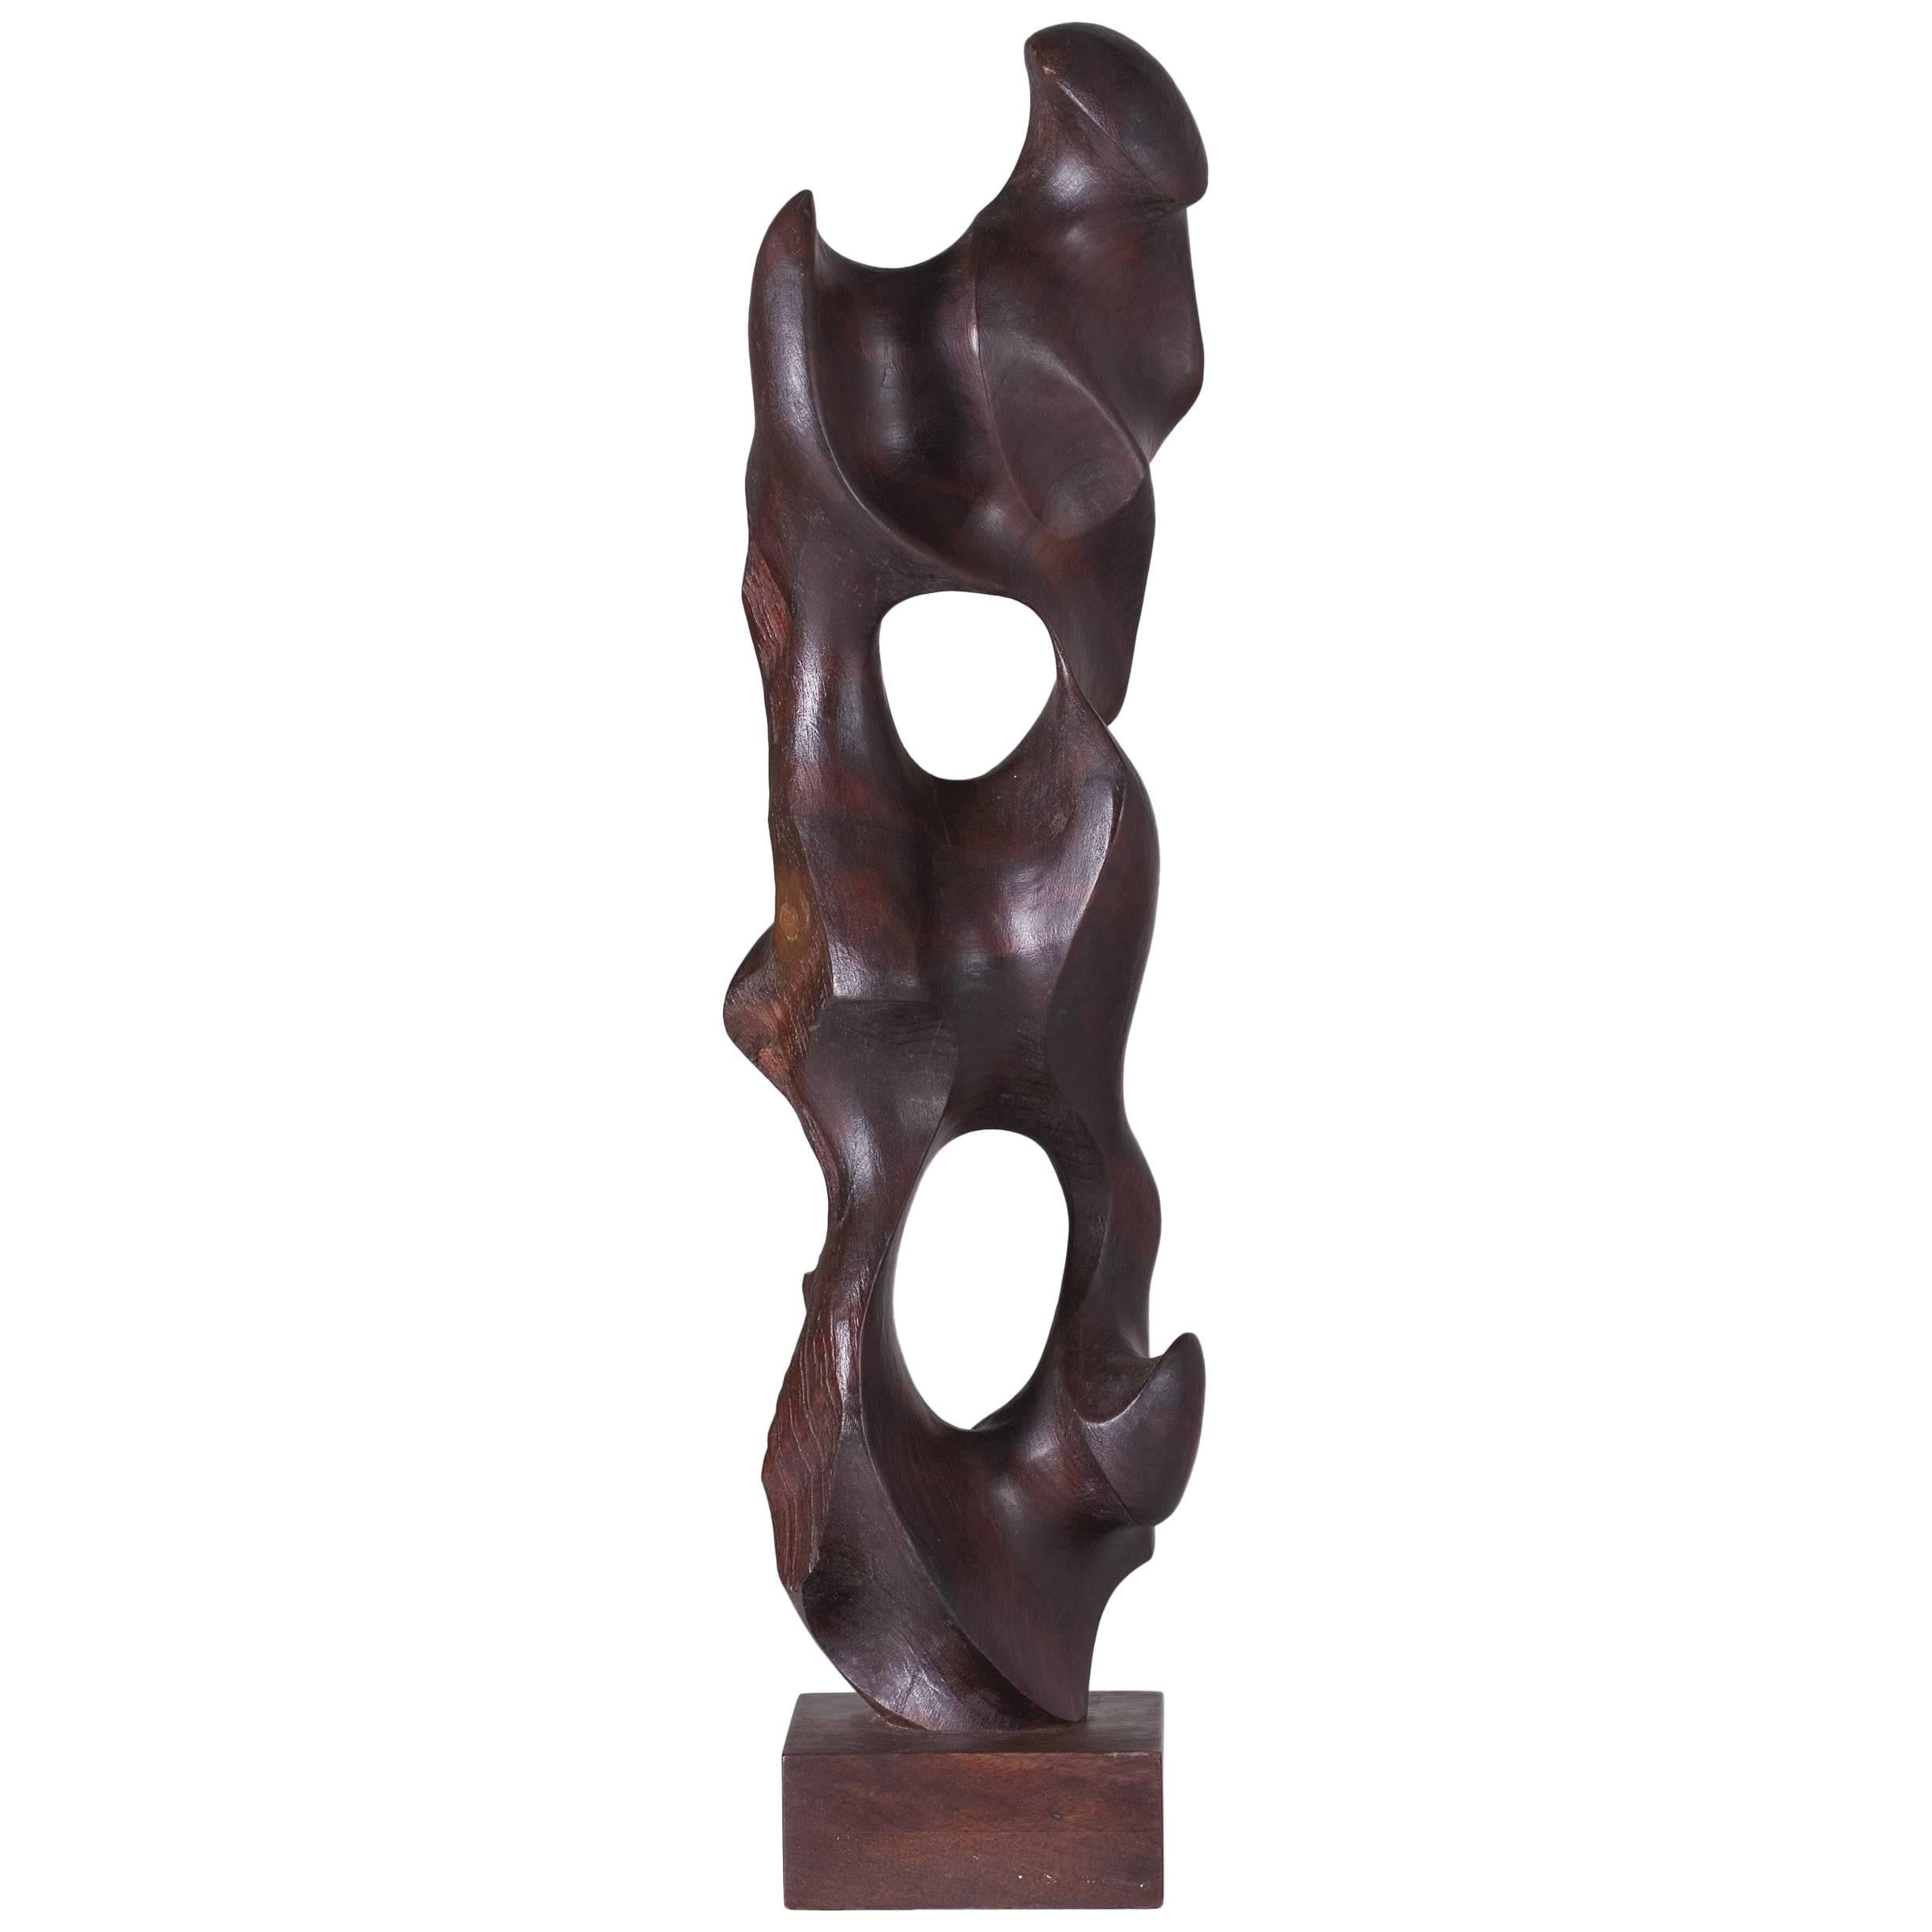 Mario Dal Fabbro, Wood Sculpture, United States, 1983 For Sale